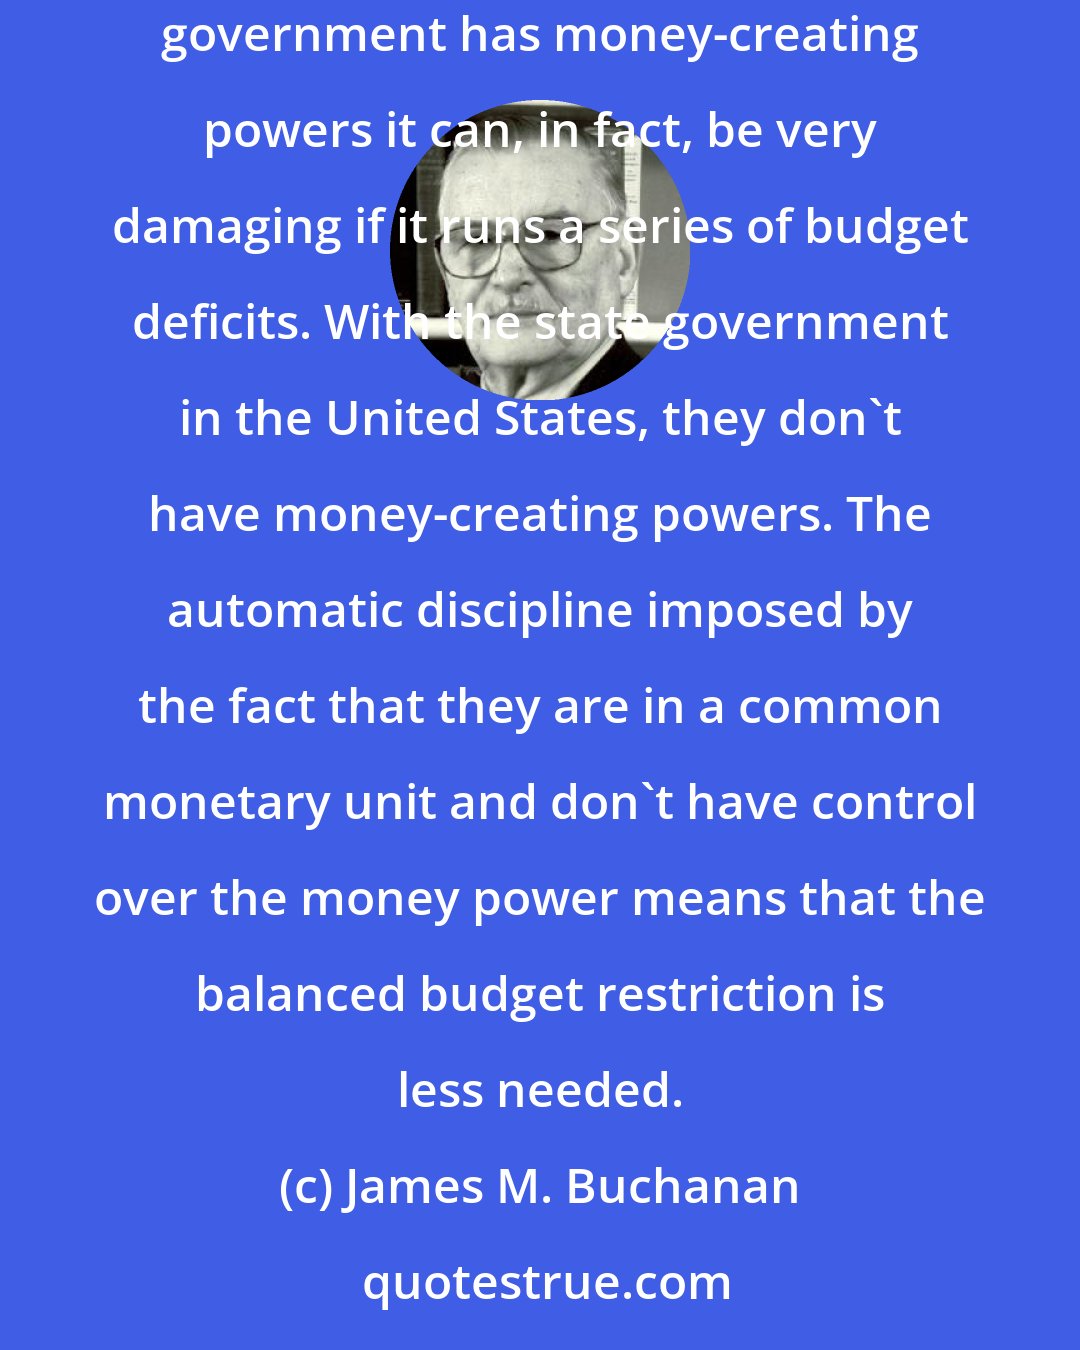 James M. Buchanan: I have long been in favor of a balanced budget restriction at the level of the federal government of the United States. Because the federal government has money-creating powers it can, in fact, be very damaging if it runs a series of budget deficits. With the state government in the United States, they don't have money-creating powers. The automatic discipline imposed by the fact that they are in a common monetary unit and don't have control over the money power means that the balanced budget restriction is less needed.